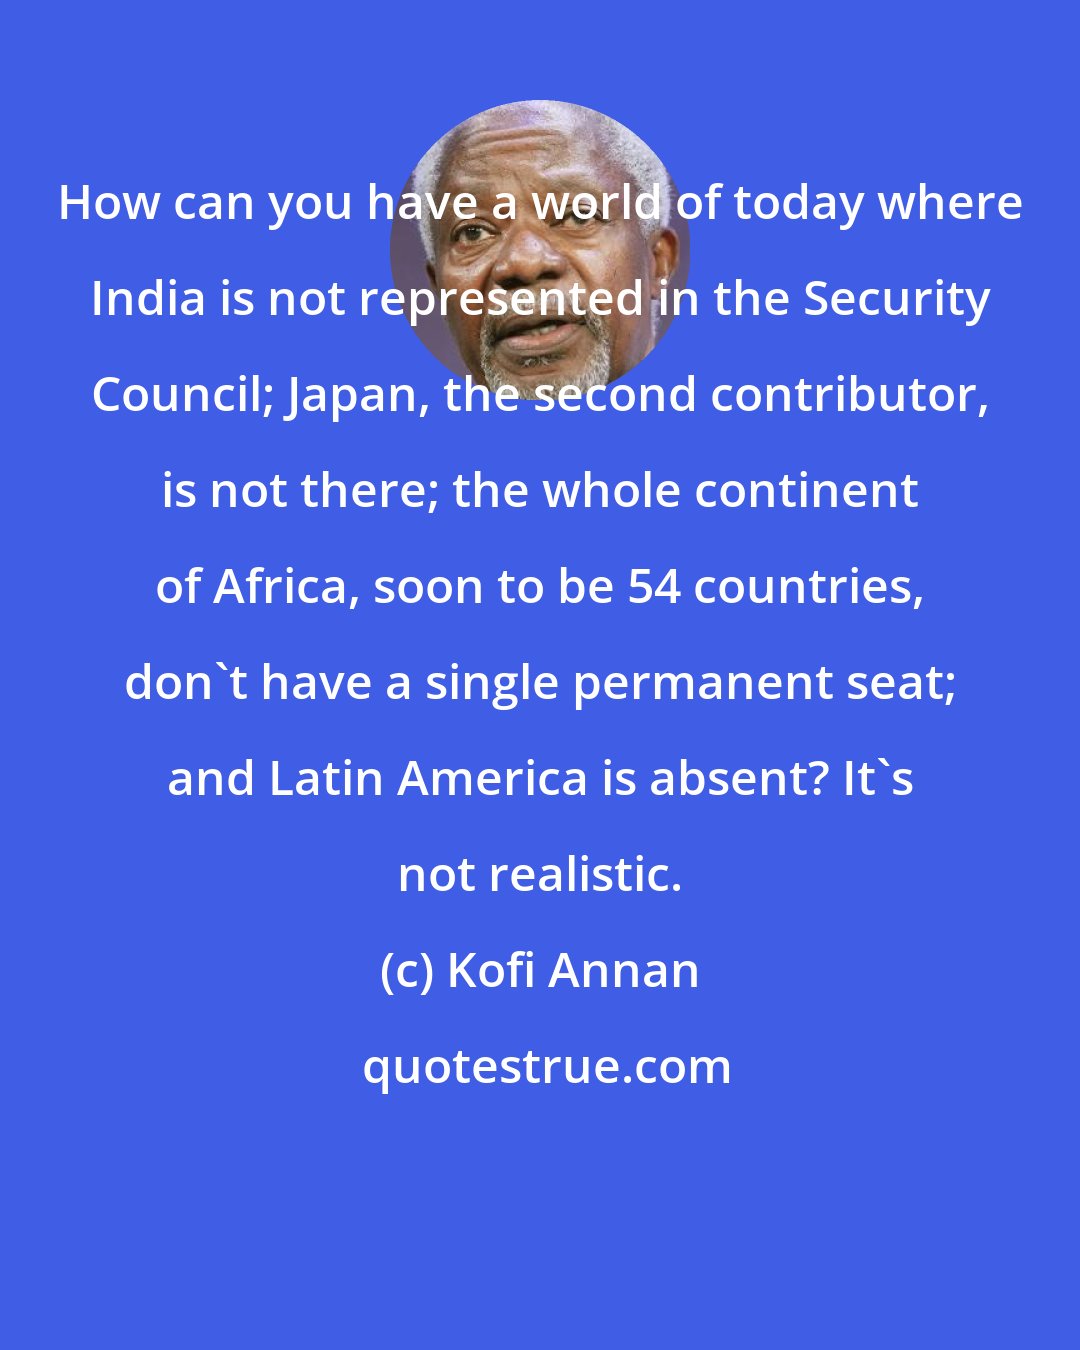 Kofi Annan: How can you have a world of today where India is not represented in the Security Council; Japan, the second contributor, is not there; the whole continent of Africa, soon to be 54 countries, don't have a single permanent seat; and Latin America is absent? It's not realistic.